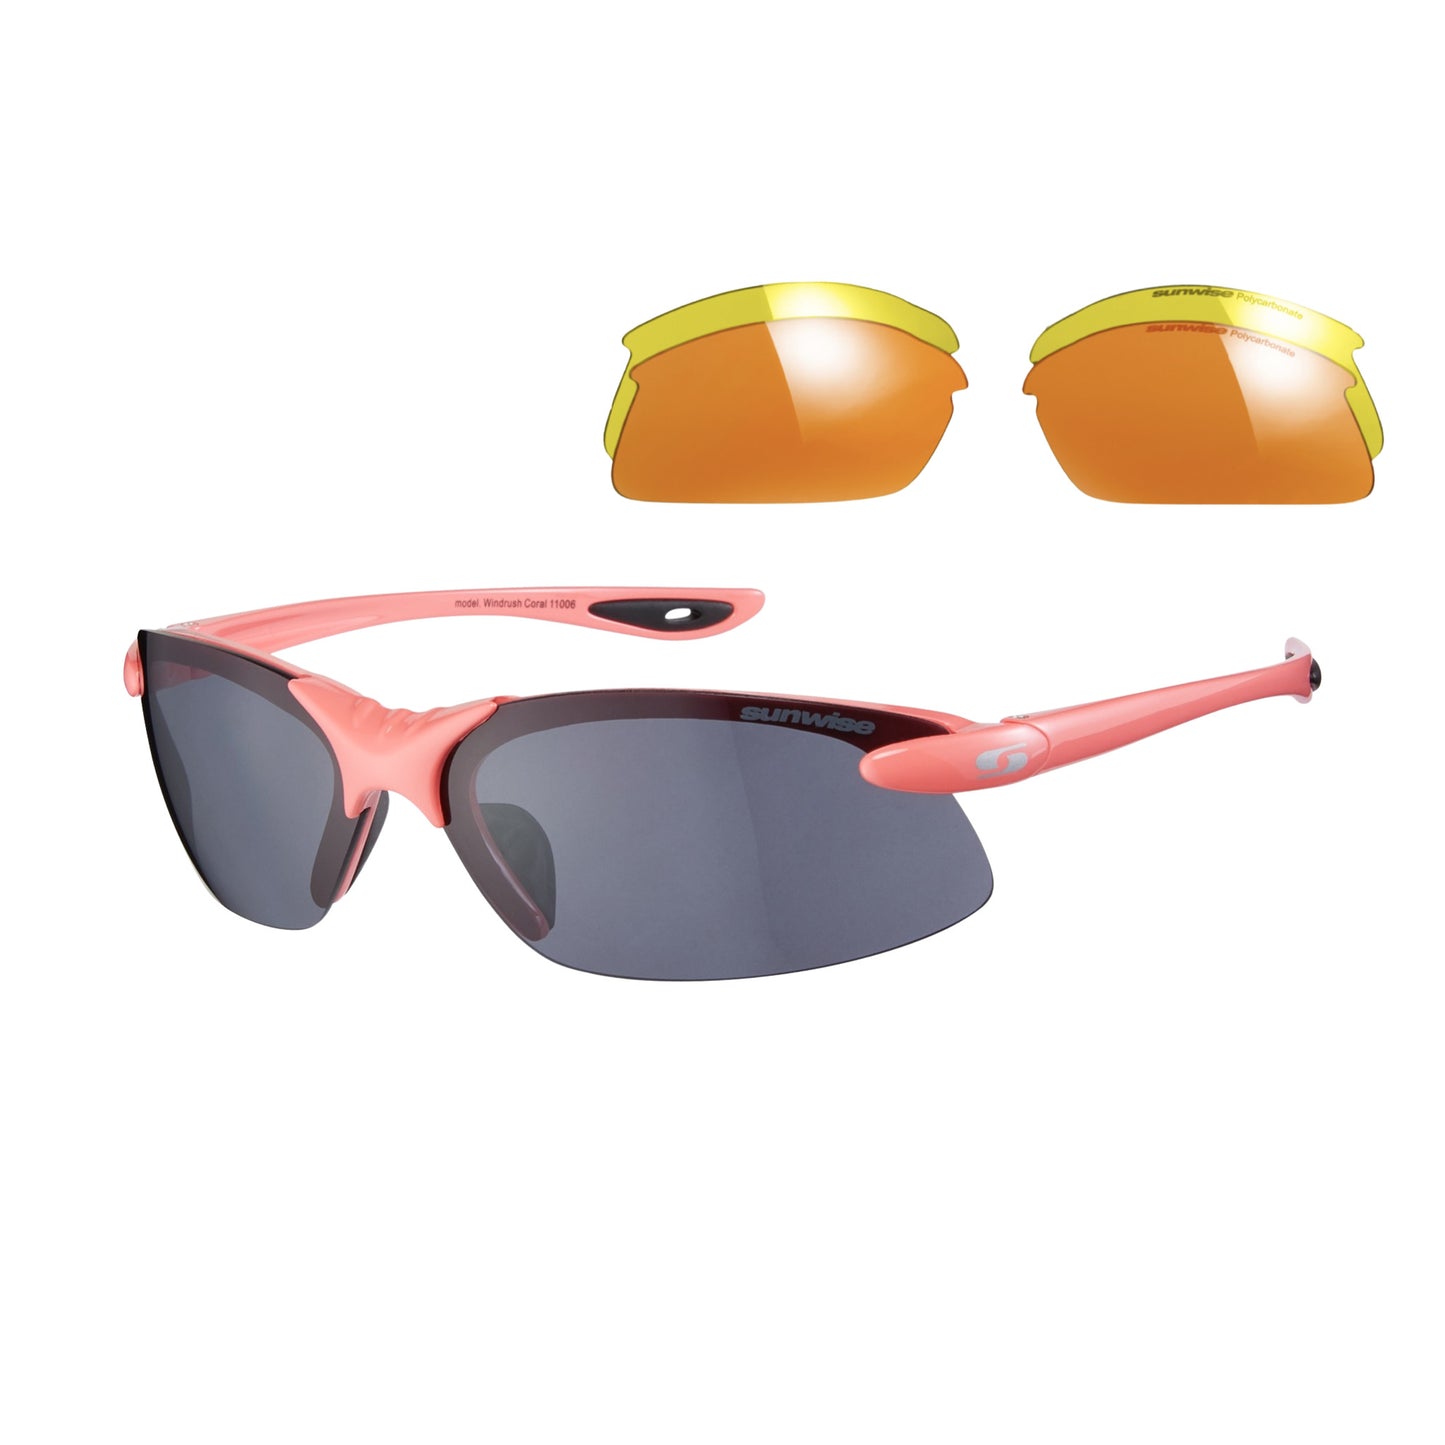 Sunwise sports sunglasses, Windrush, coral with additional lenses